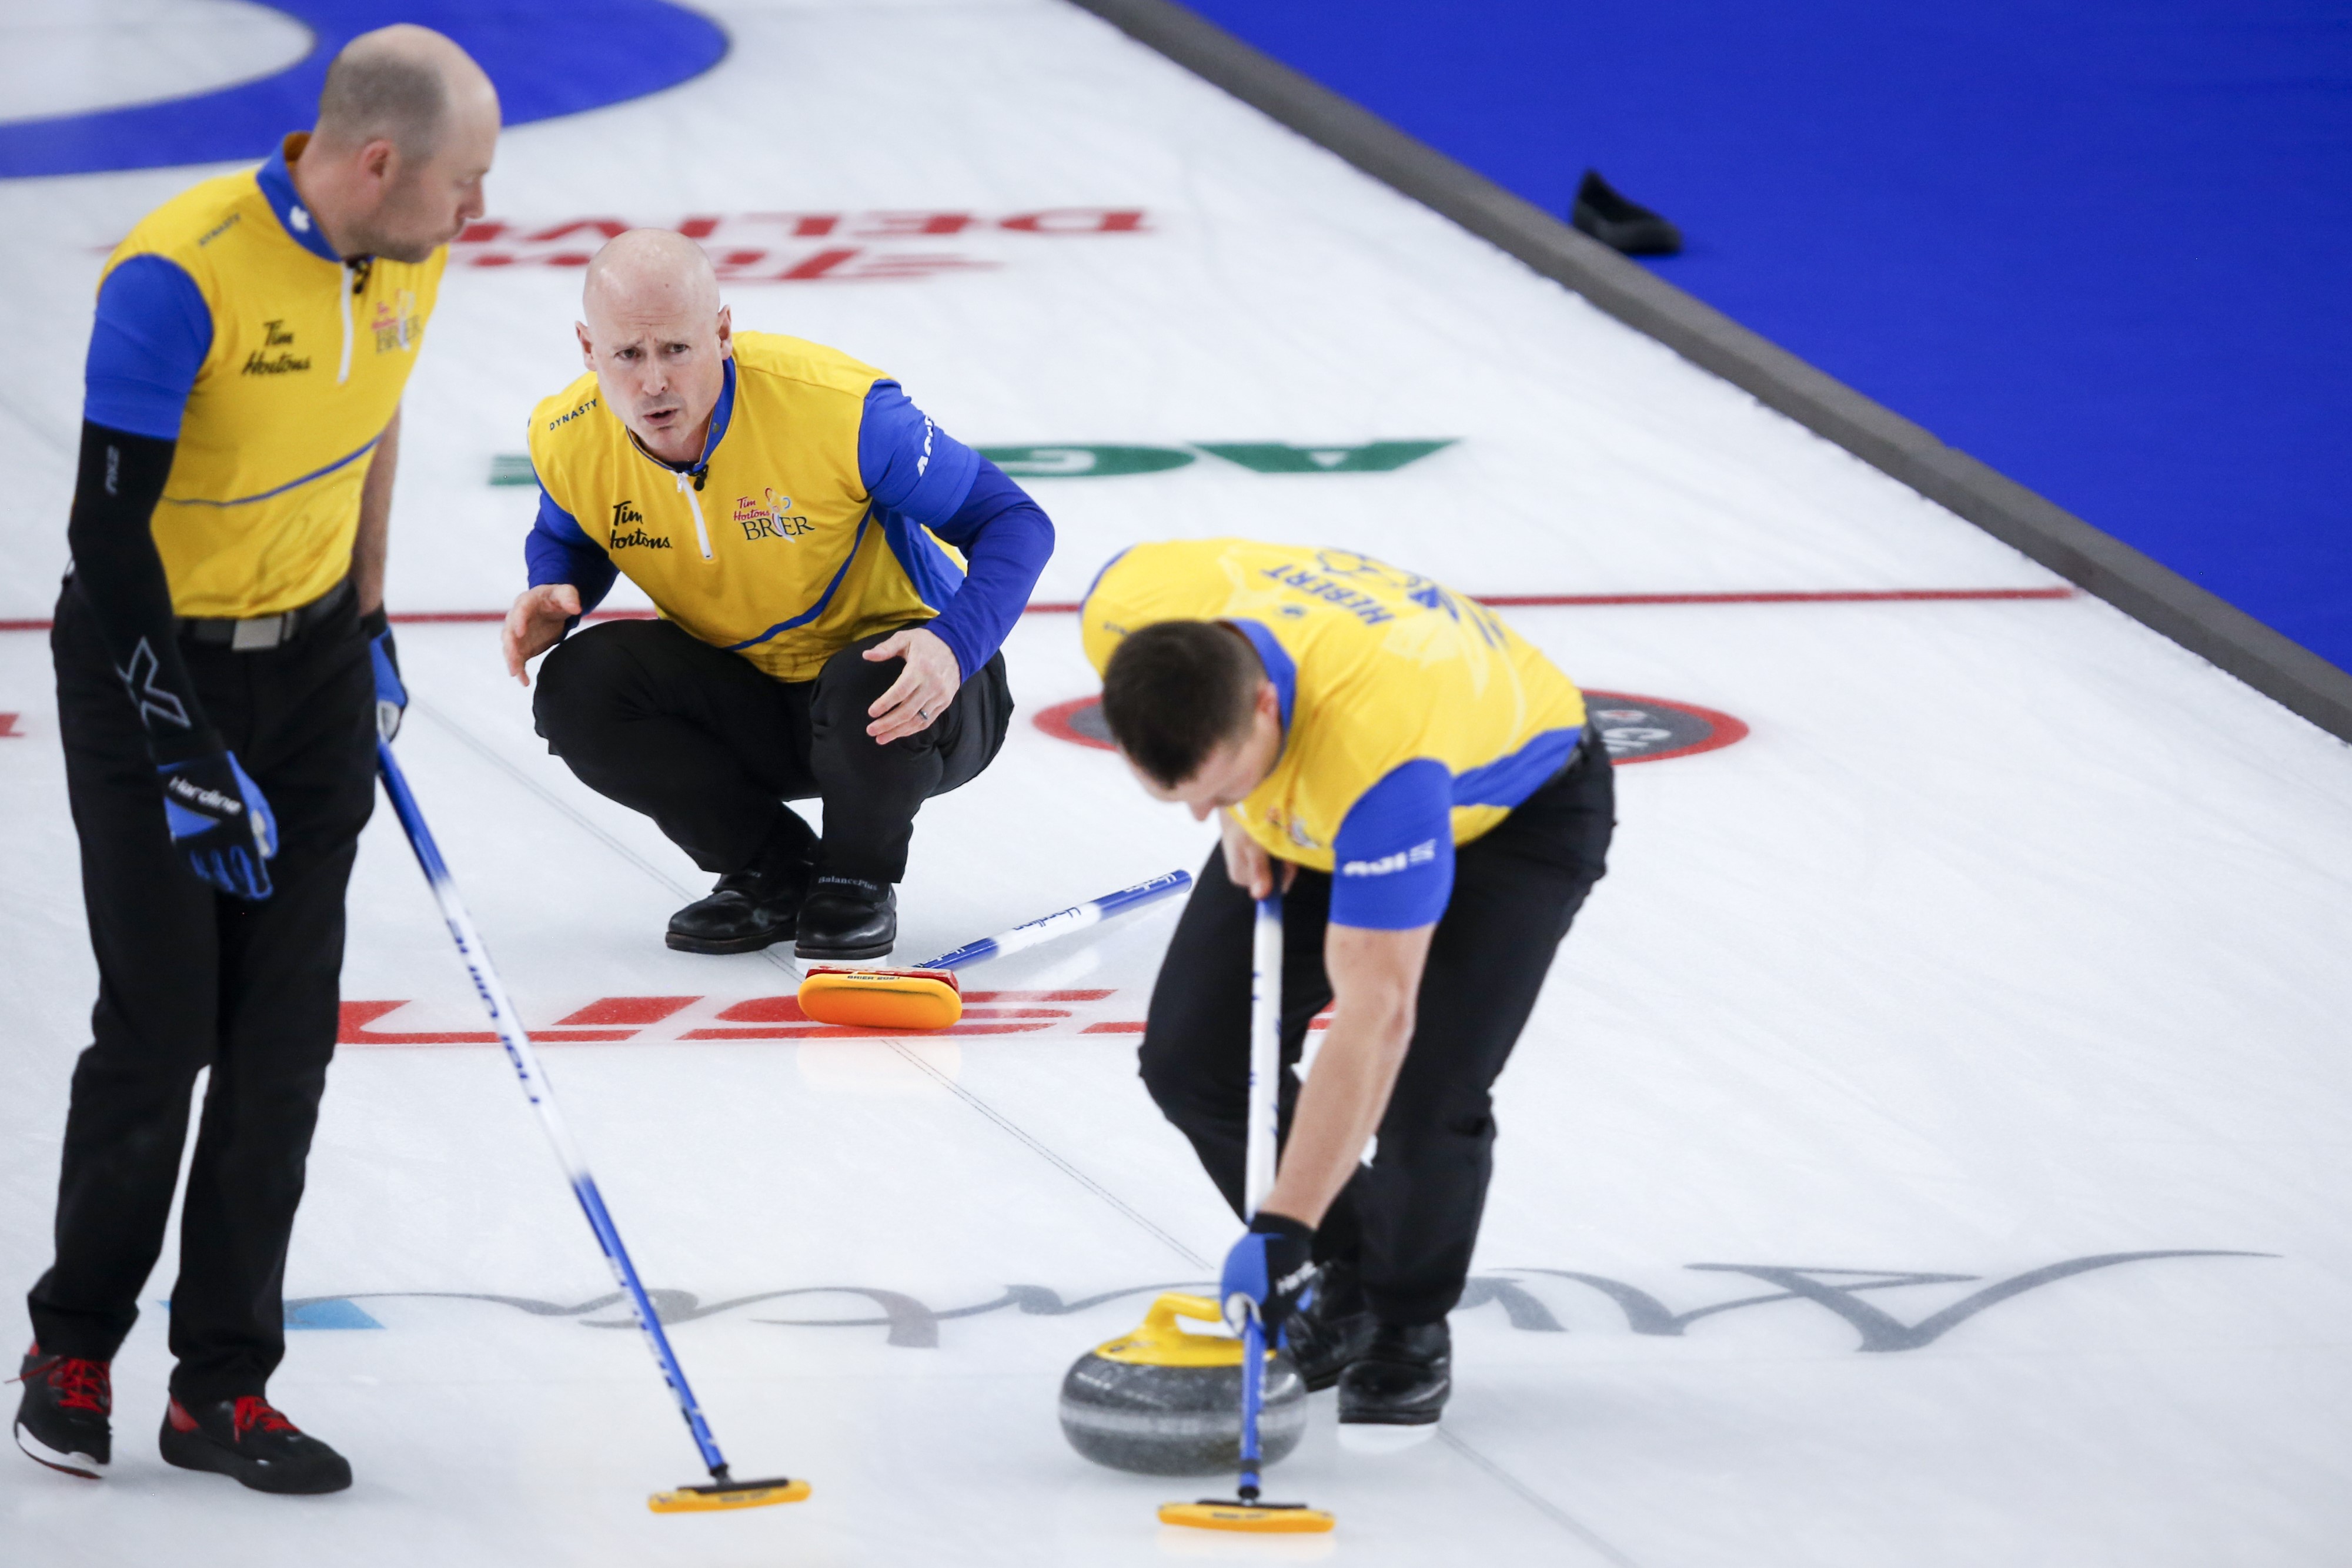 Ratings for Brier final fell 33% from 2020